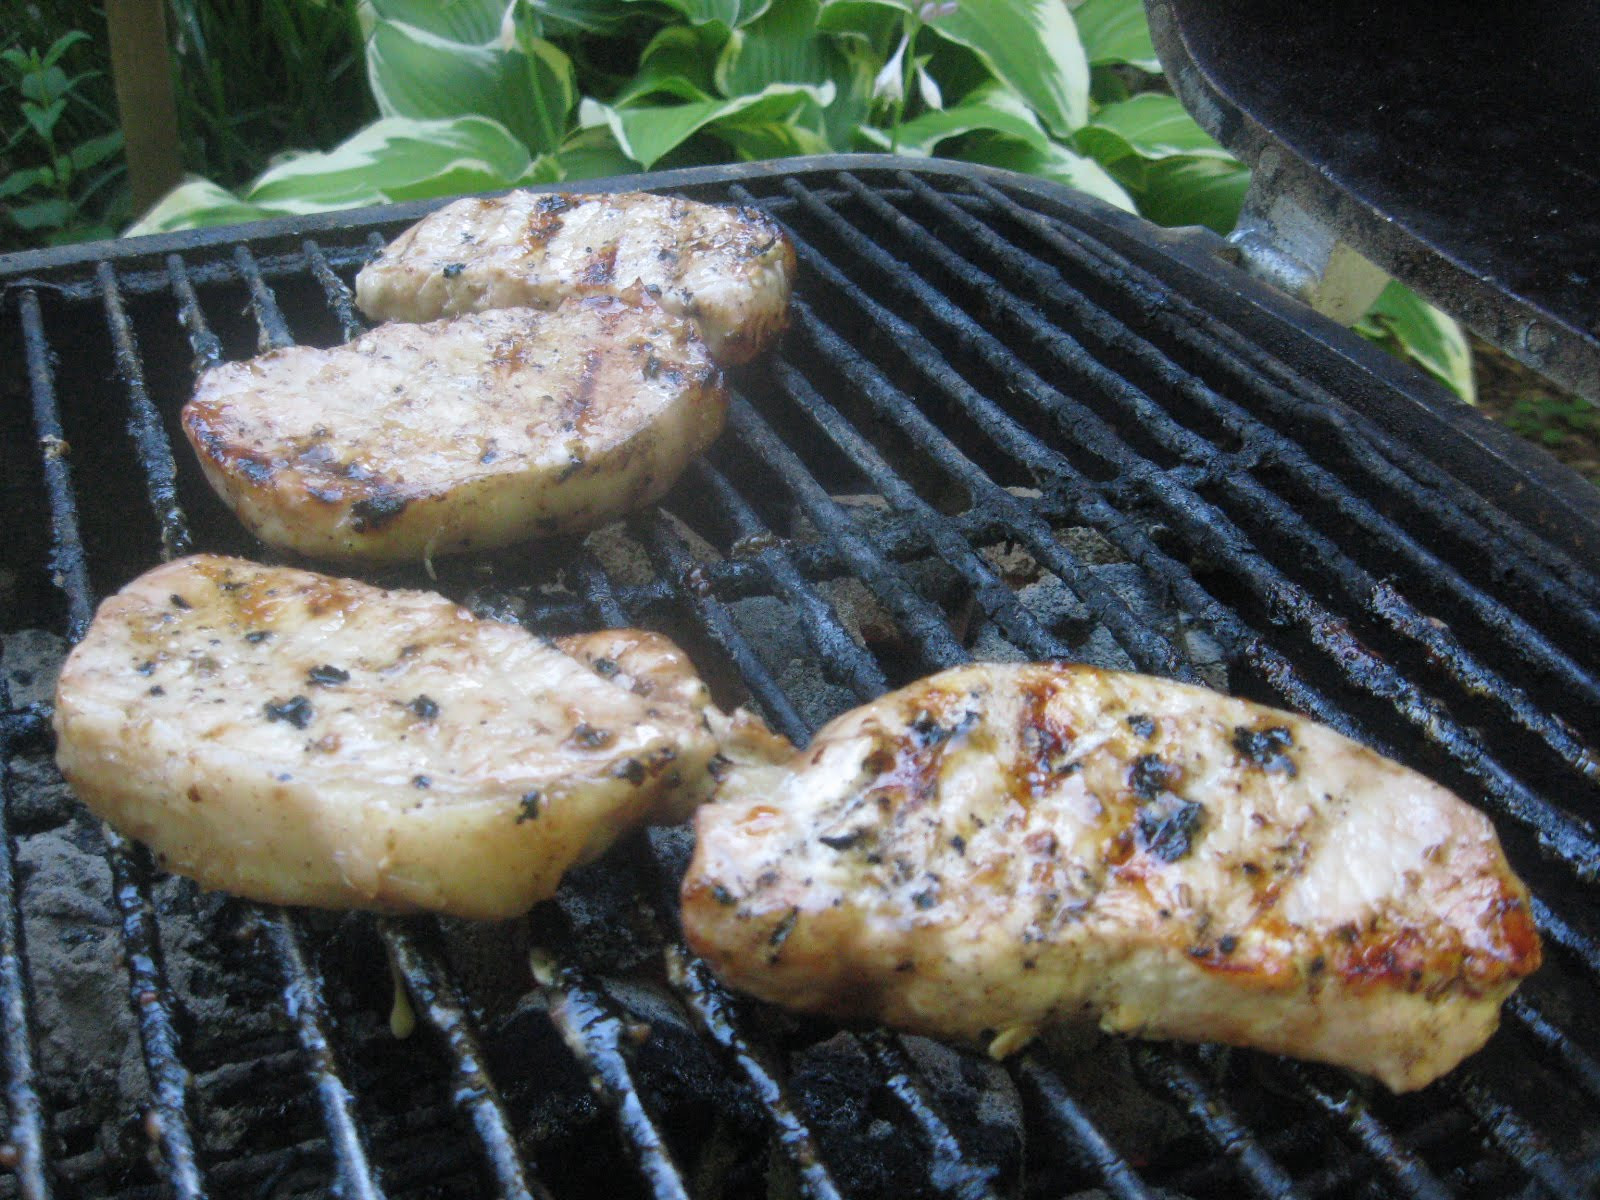 Boneless Pork Chops On The Grill
 Barbecue Master How to Grill Boneless Pork Chops